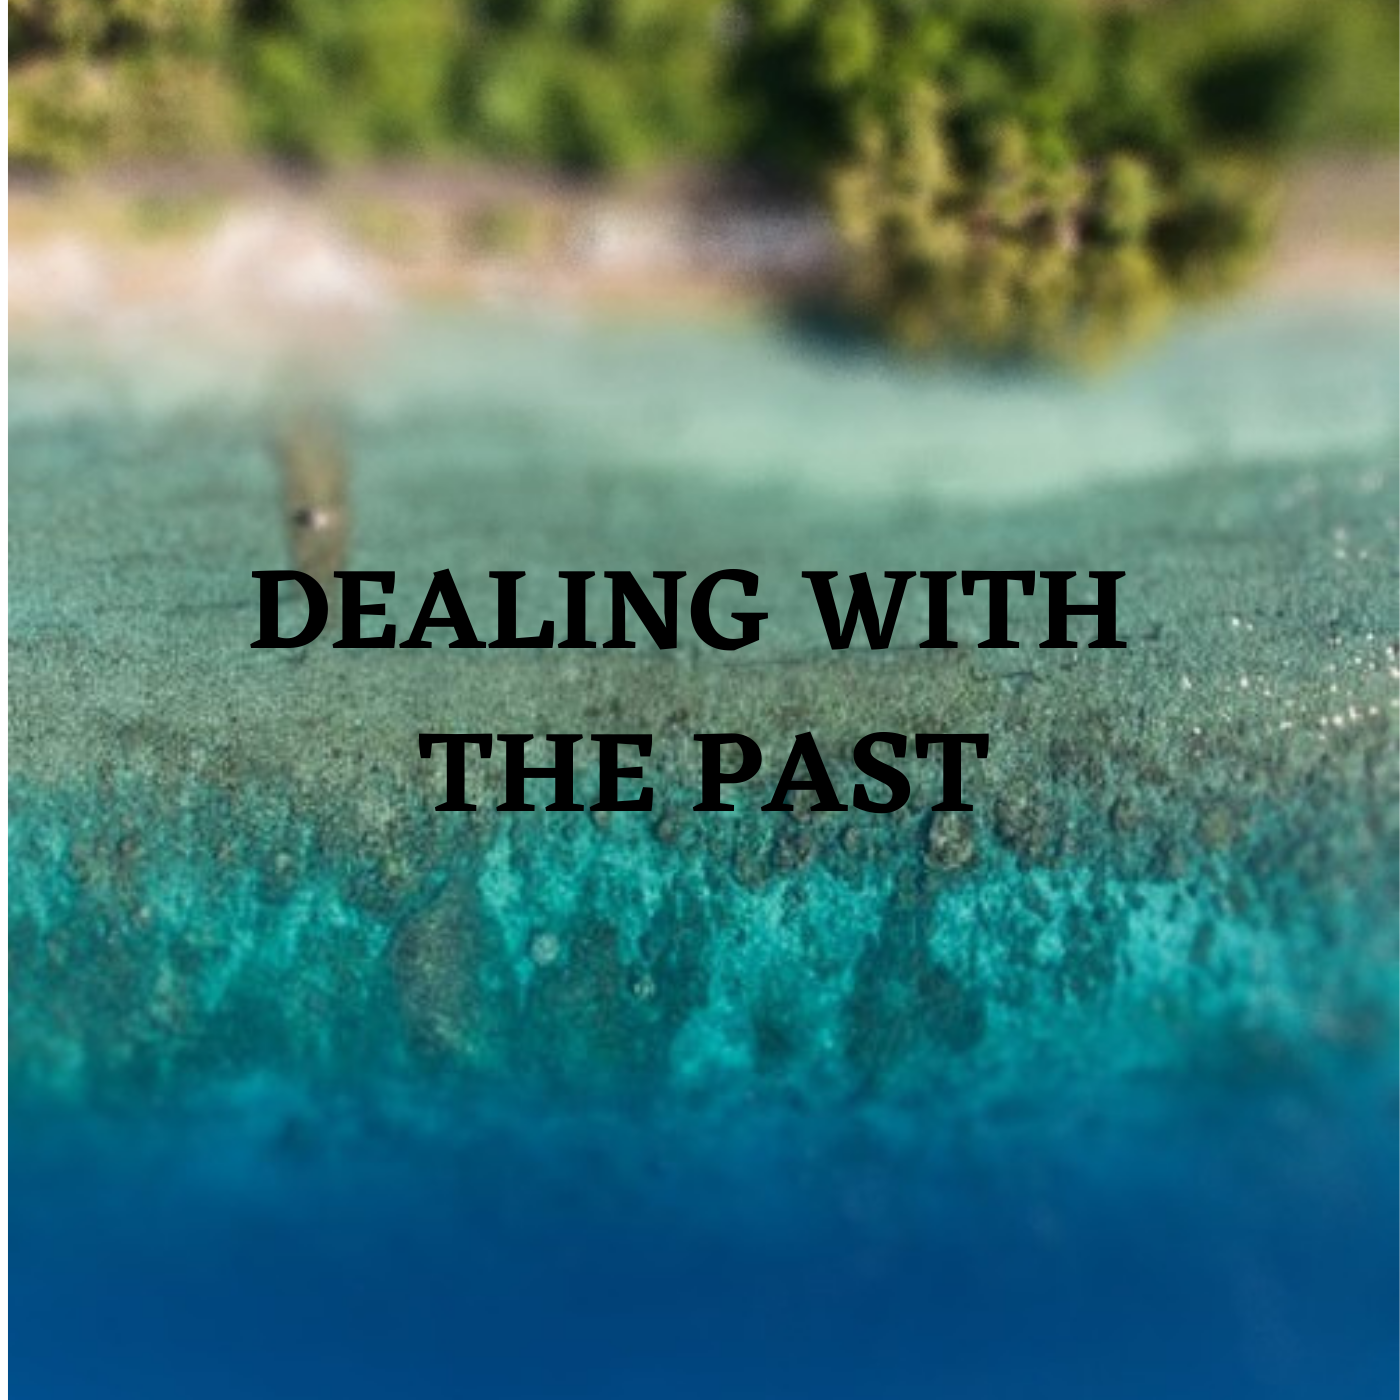 DEALING WITH THE PAST